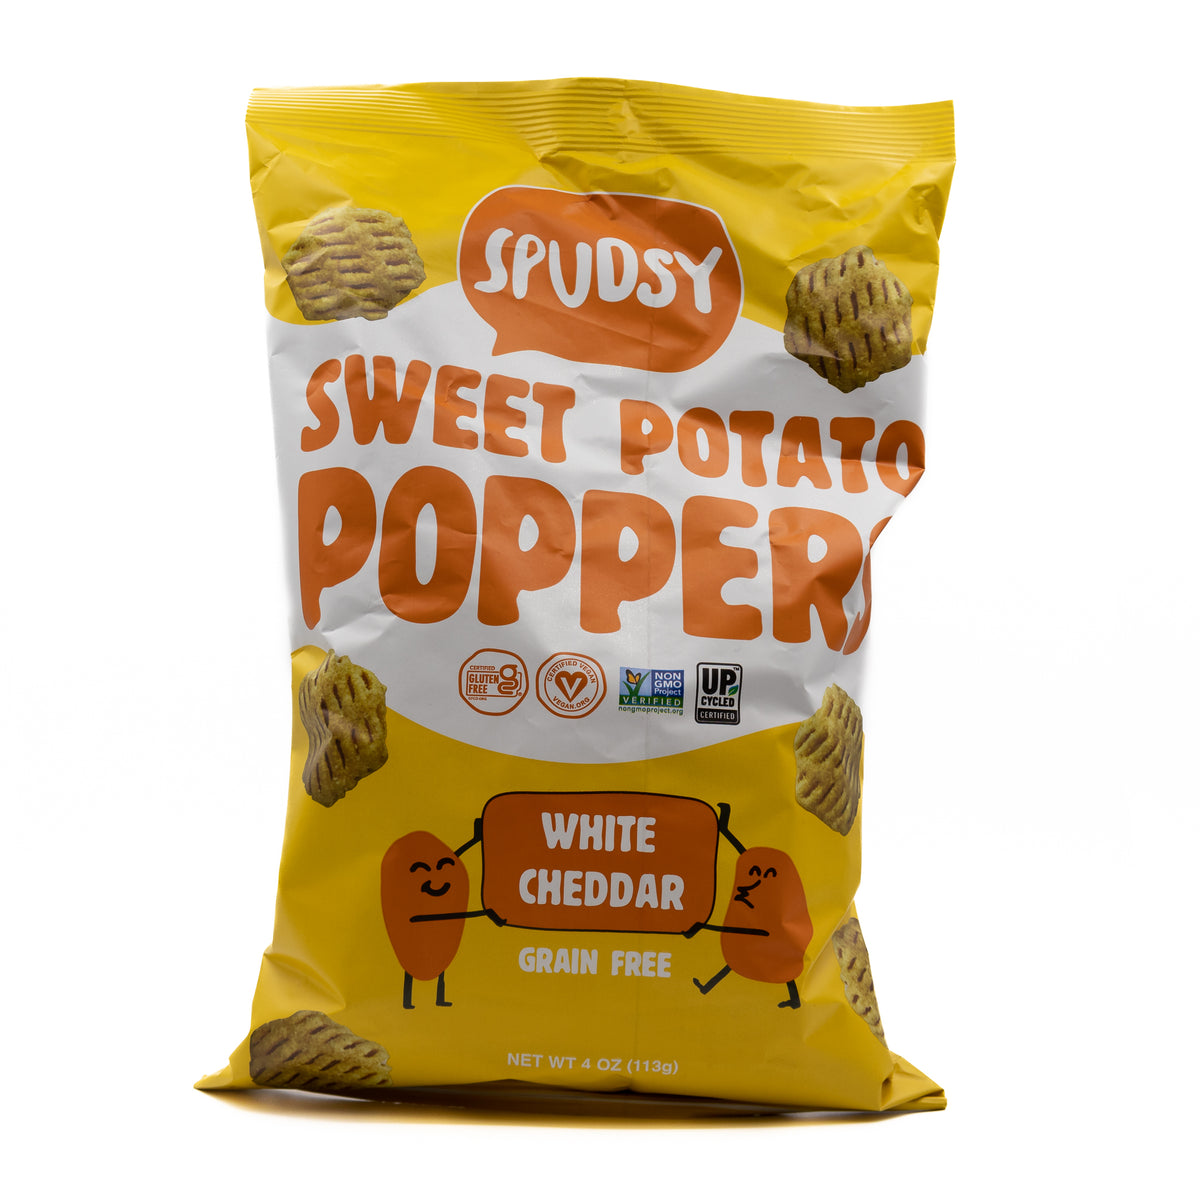 Spudsy Sweet Potato Poppers White Cheddar